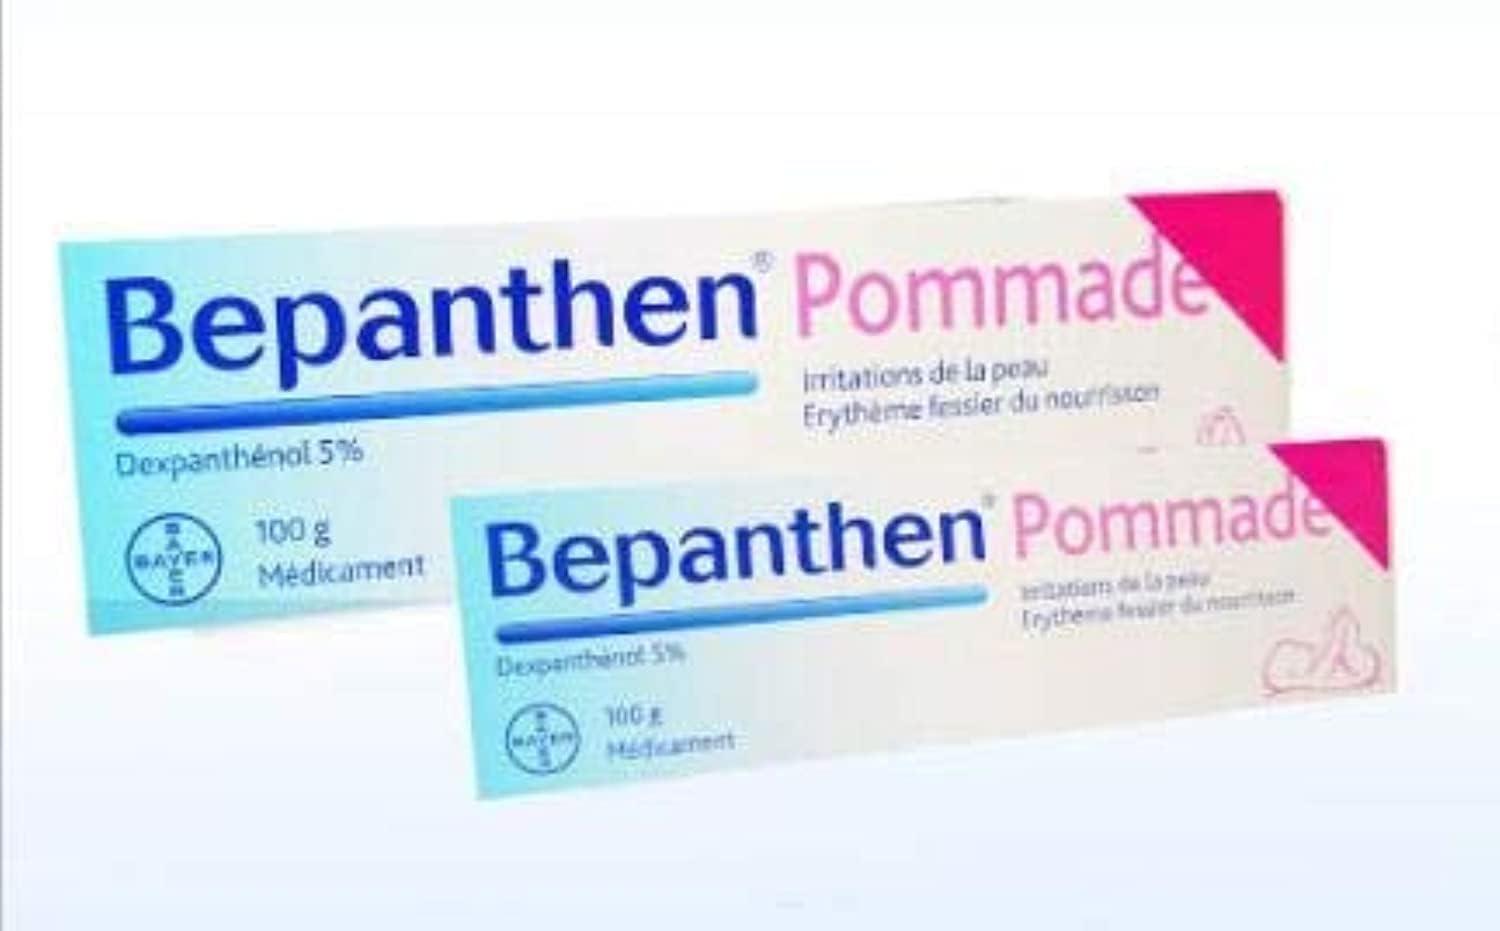 Bepanthen Pommade Baby Nappy Care Ointment Rash Scar Maroc